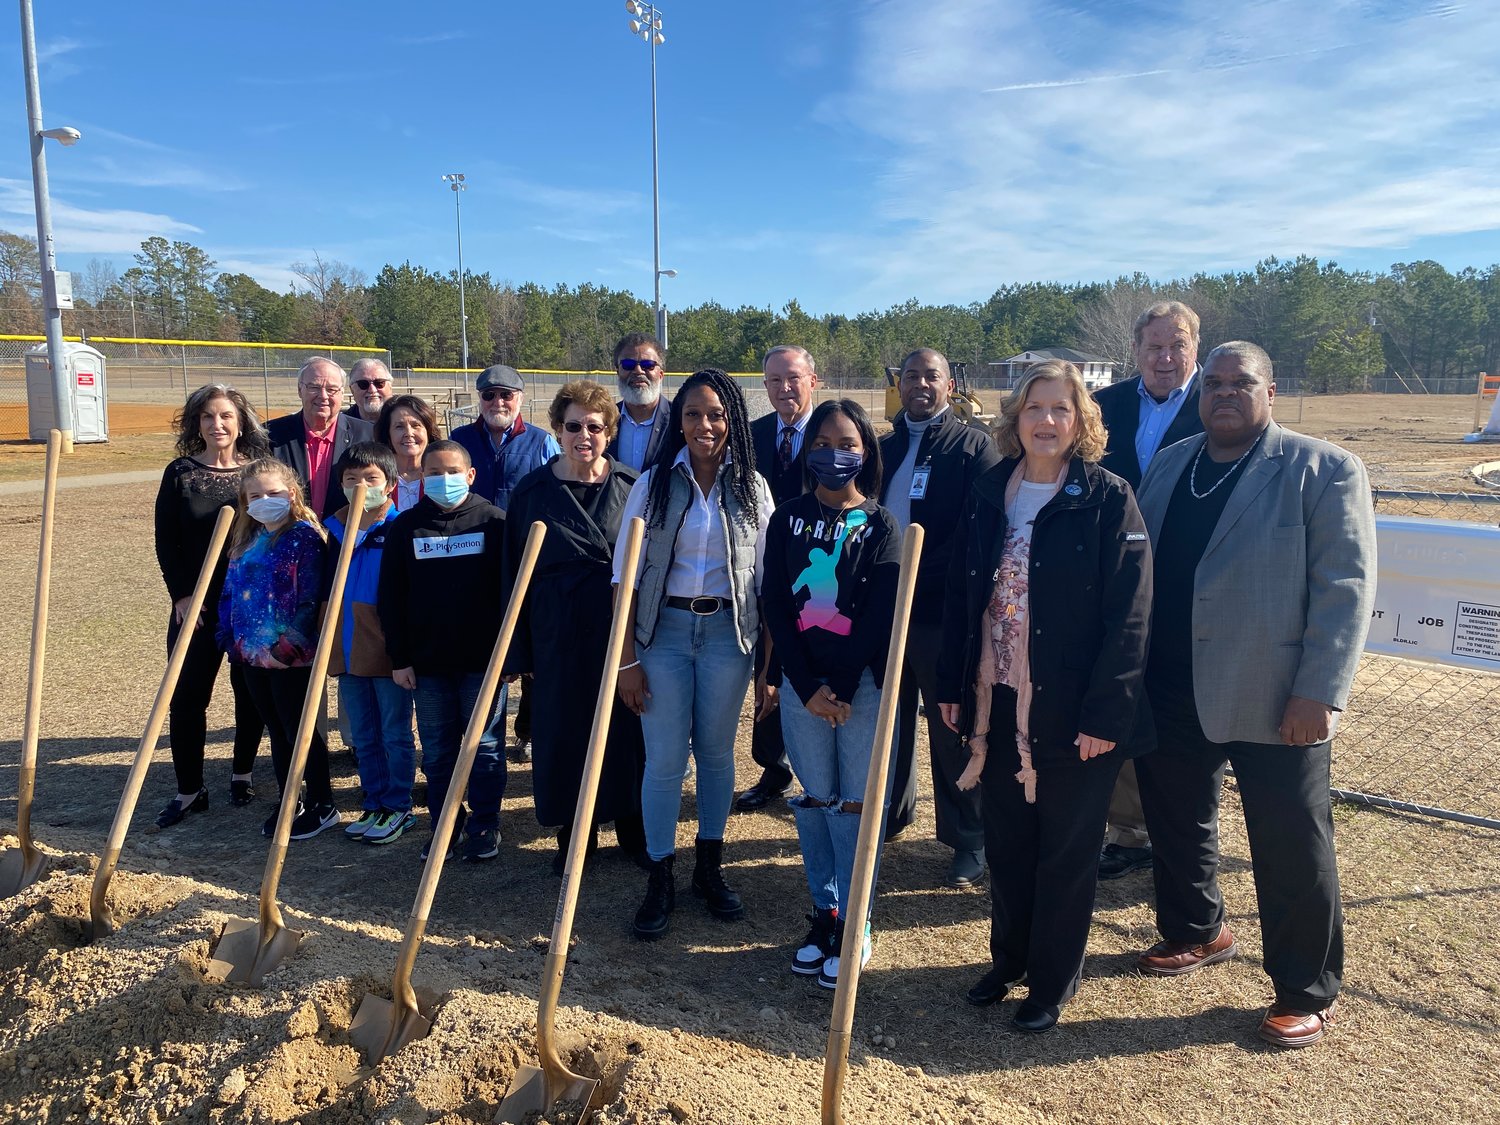 The city of Fayetteville, in partnership with the Kiwanis Club of Cape Fear, held a groundbreaking ceremony Friday for a splash pad at Lake Rim Recreation Center.